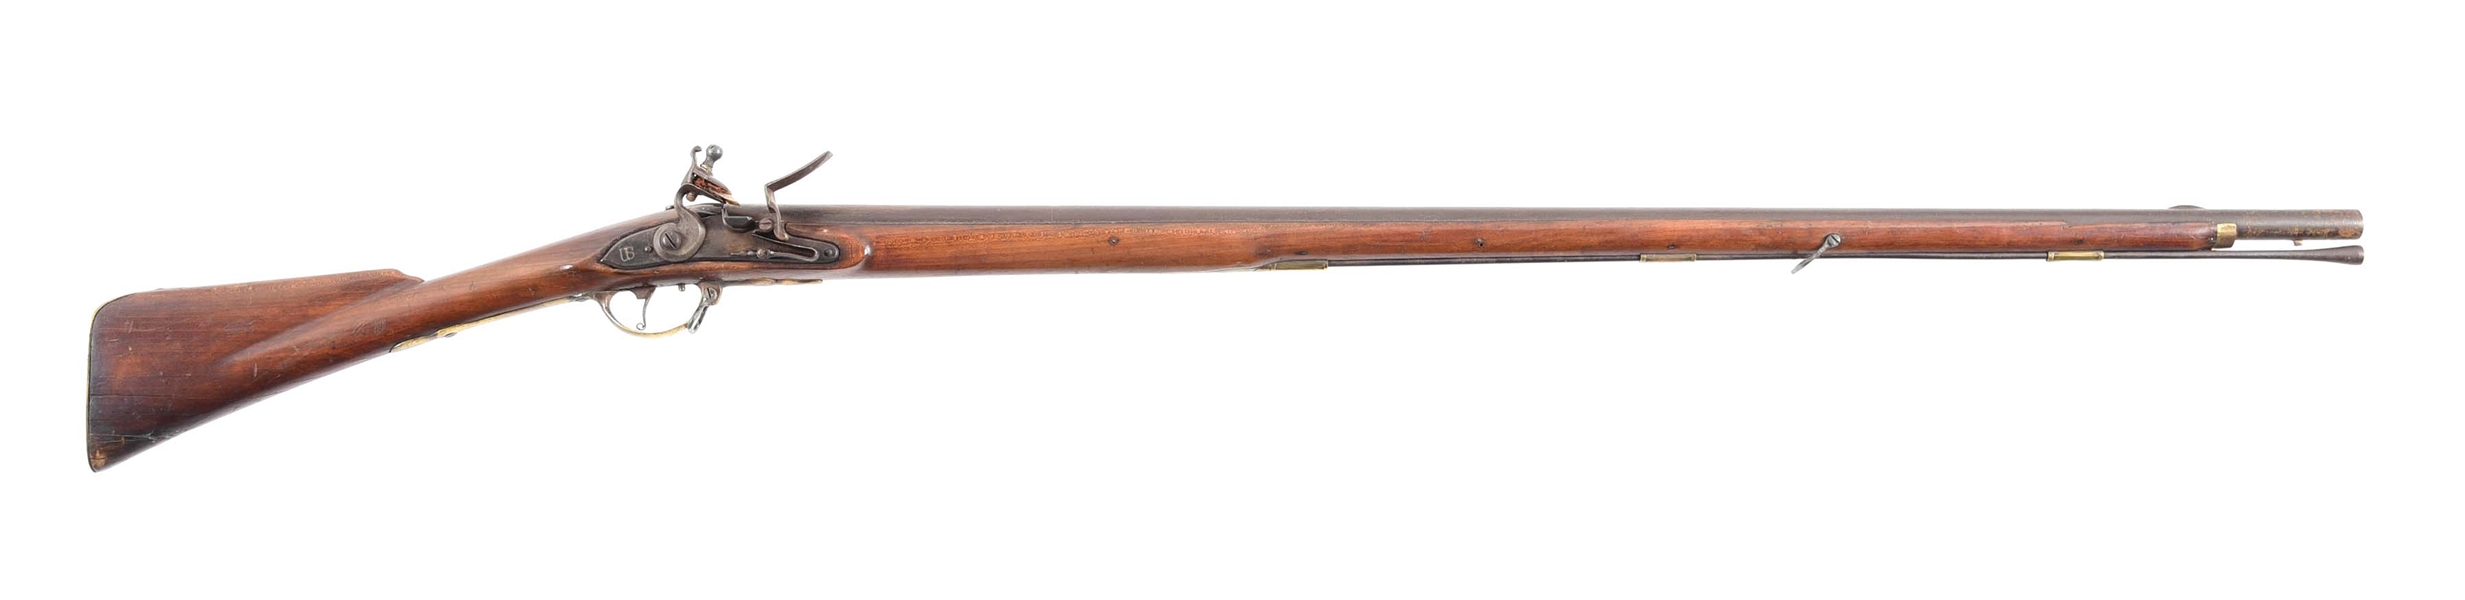 (A) "US" SURCHARGED AMERICAN RE-STOCKED DUTCH FLINTLOCK MUSKET.